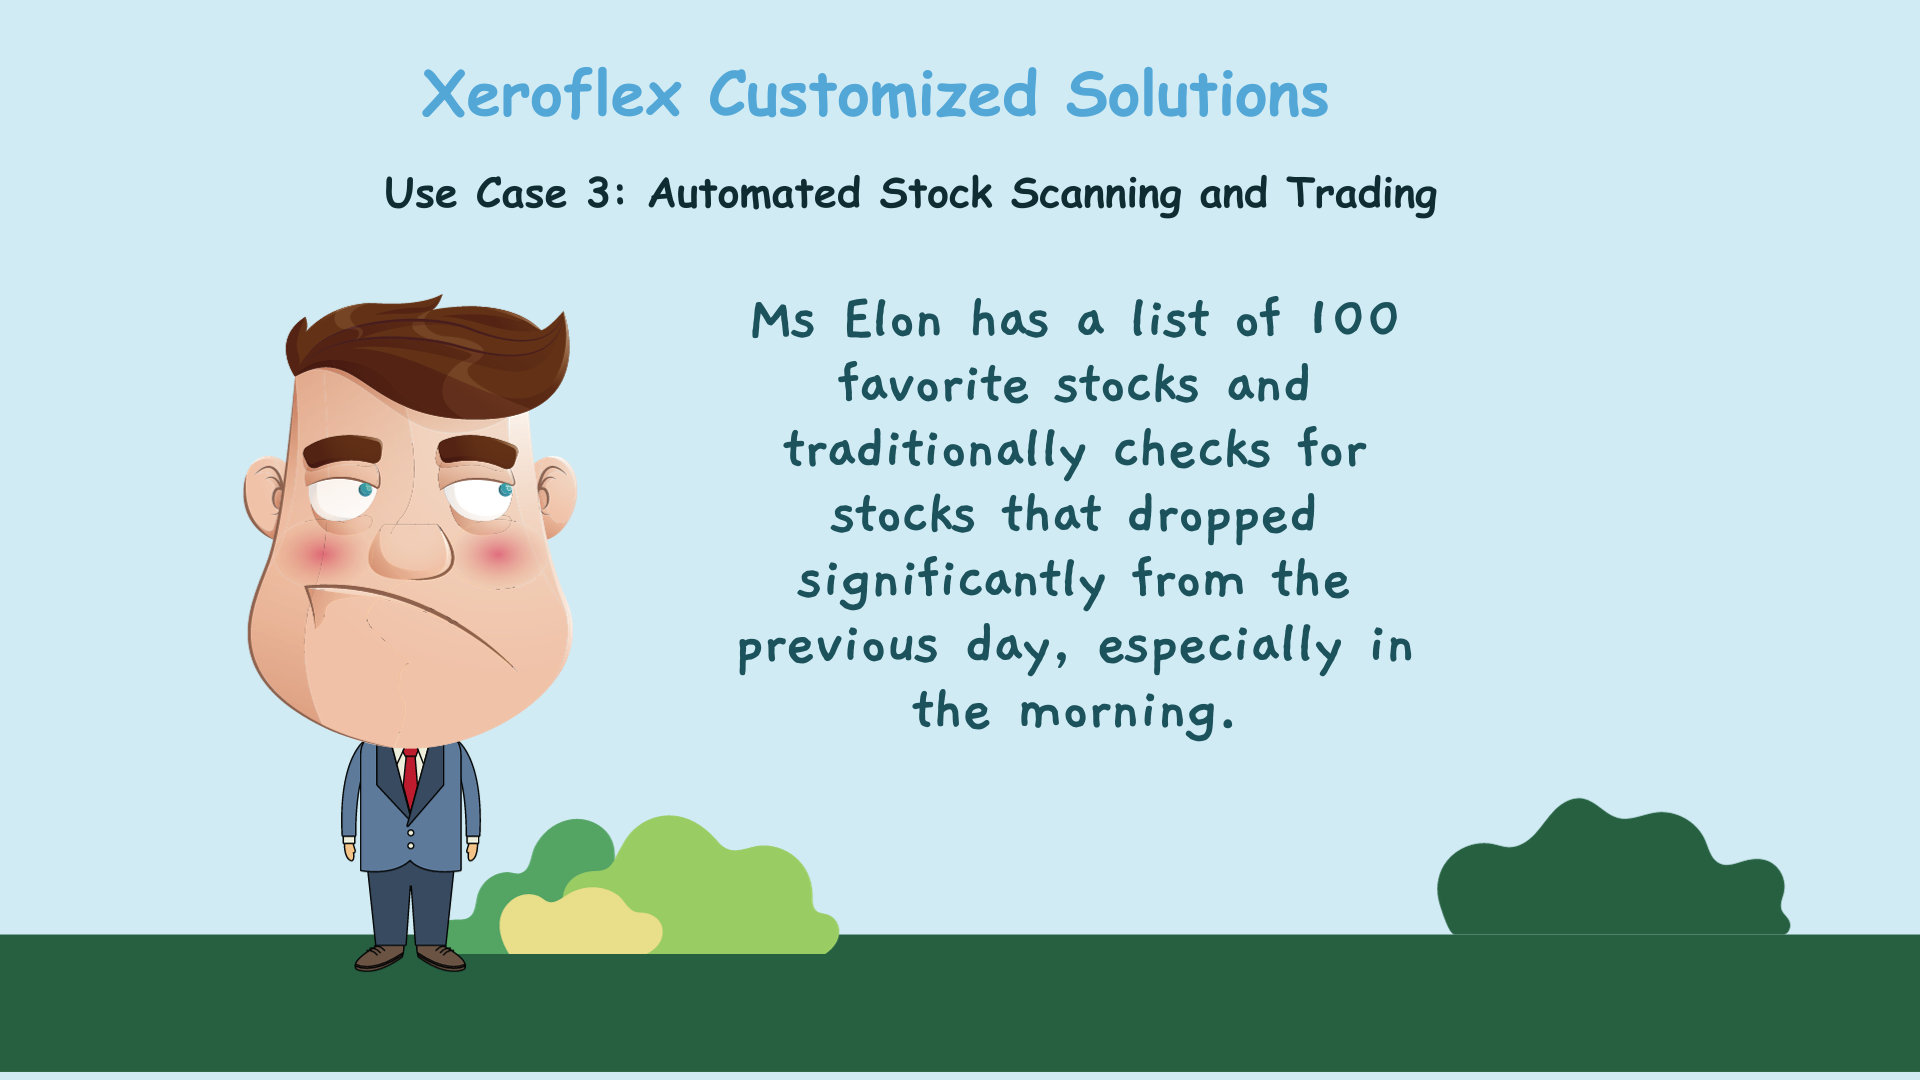 Use Case 3: Automated Stock Scanning and Trading